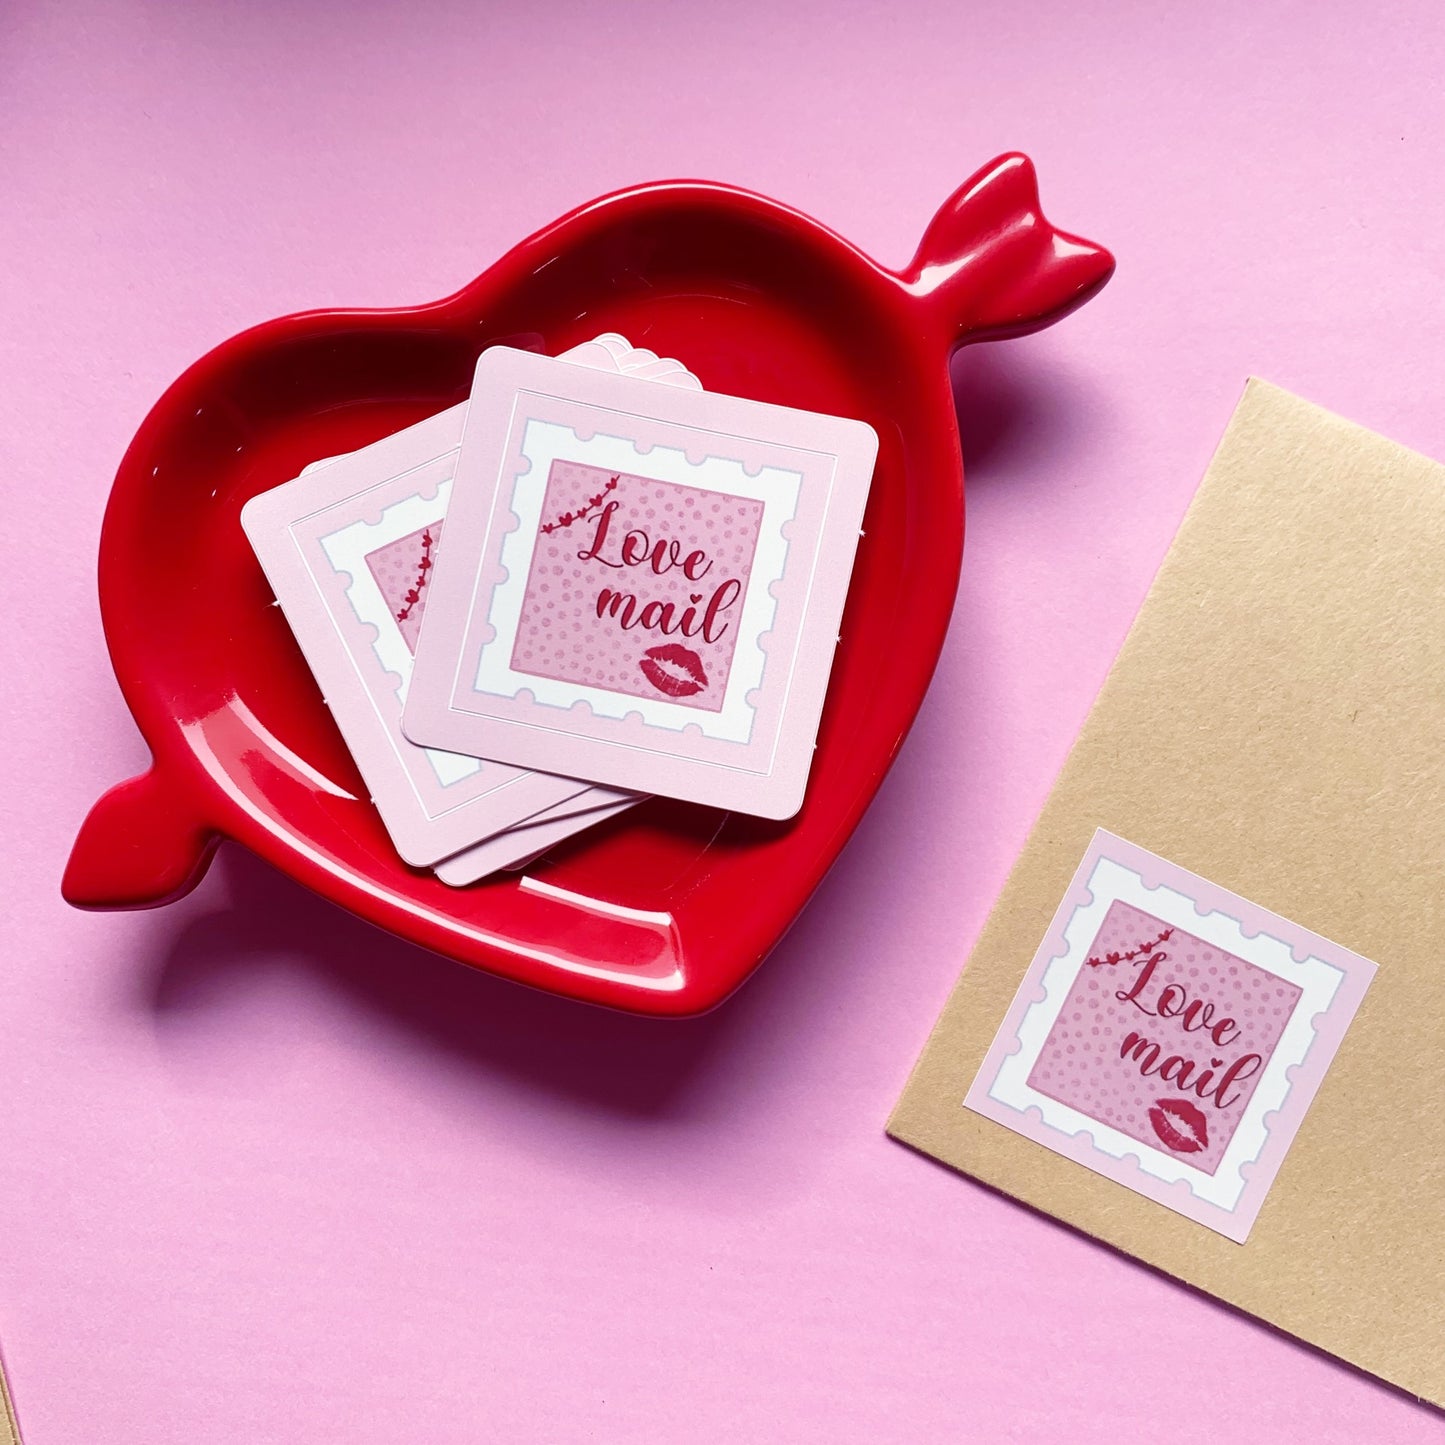 Love mail - Square stickers